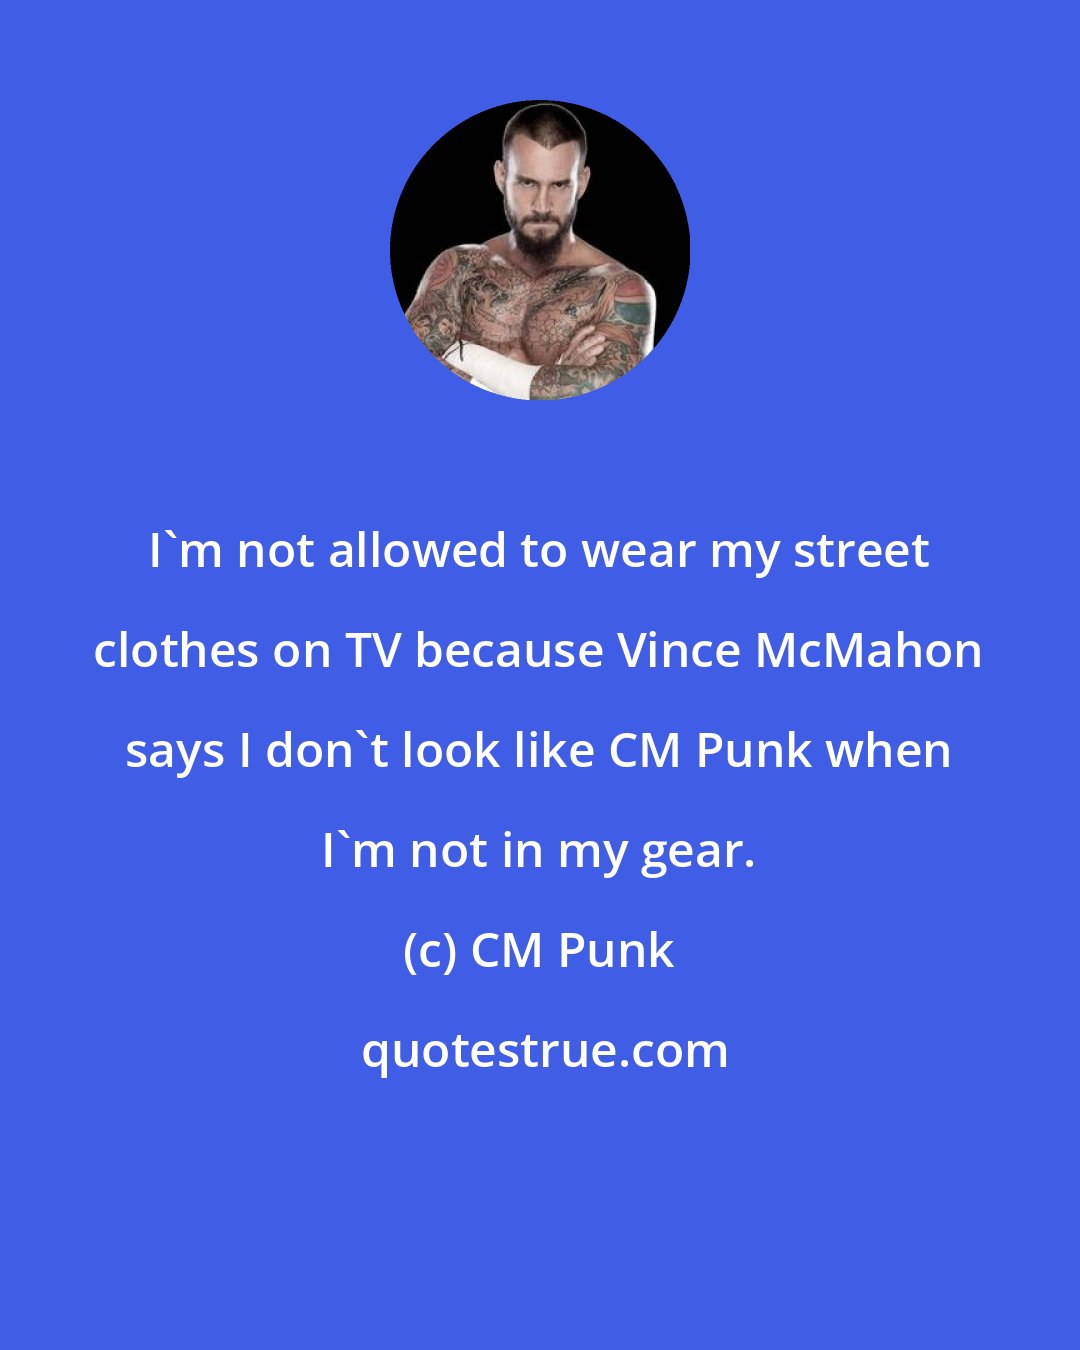 CM Punk: I'm not allowed to wear my street clothes on TV because Vince McMahon says I don't look like CM Punk when I'm not in my gear.